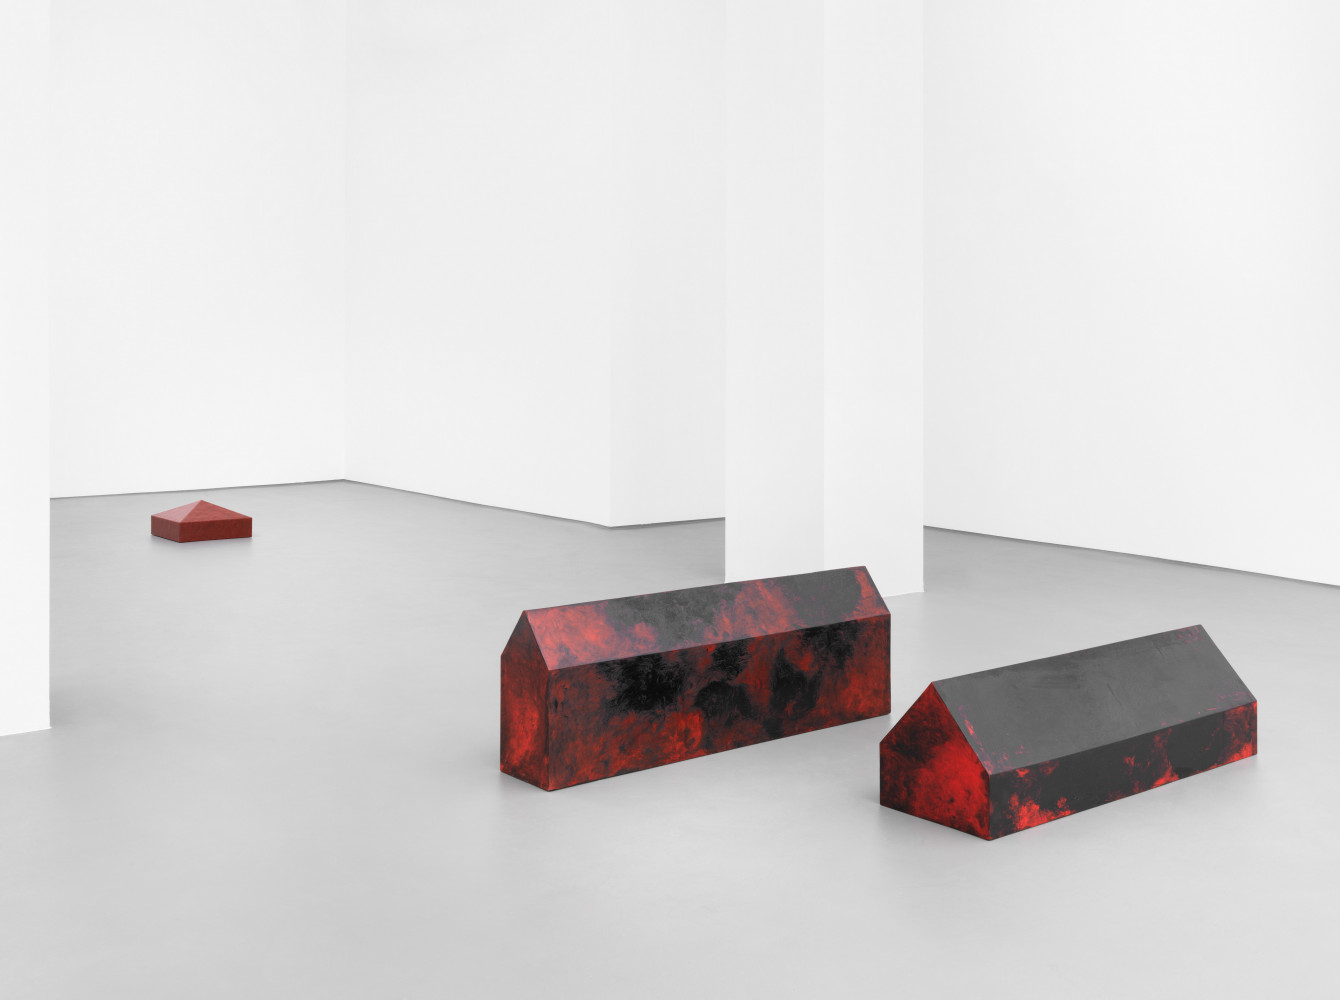 Installation view Wolfgang Laib in the Buchmann Galerie 2022